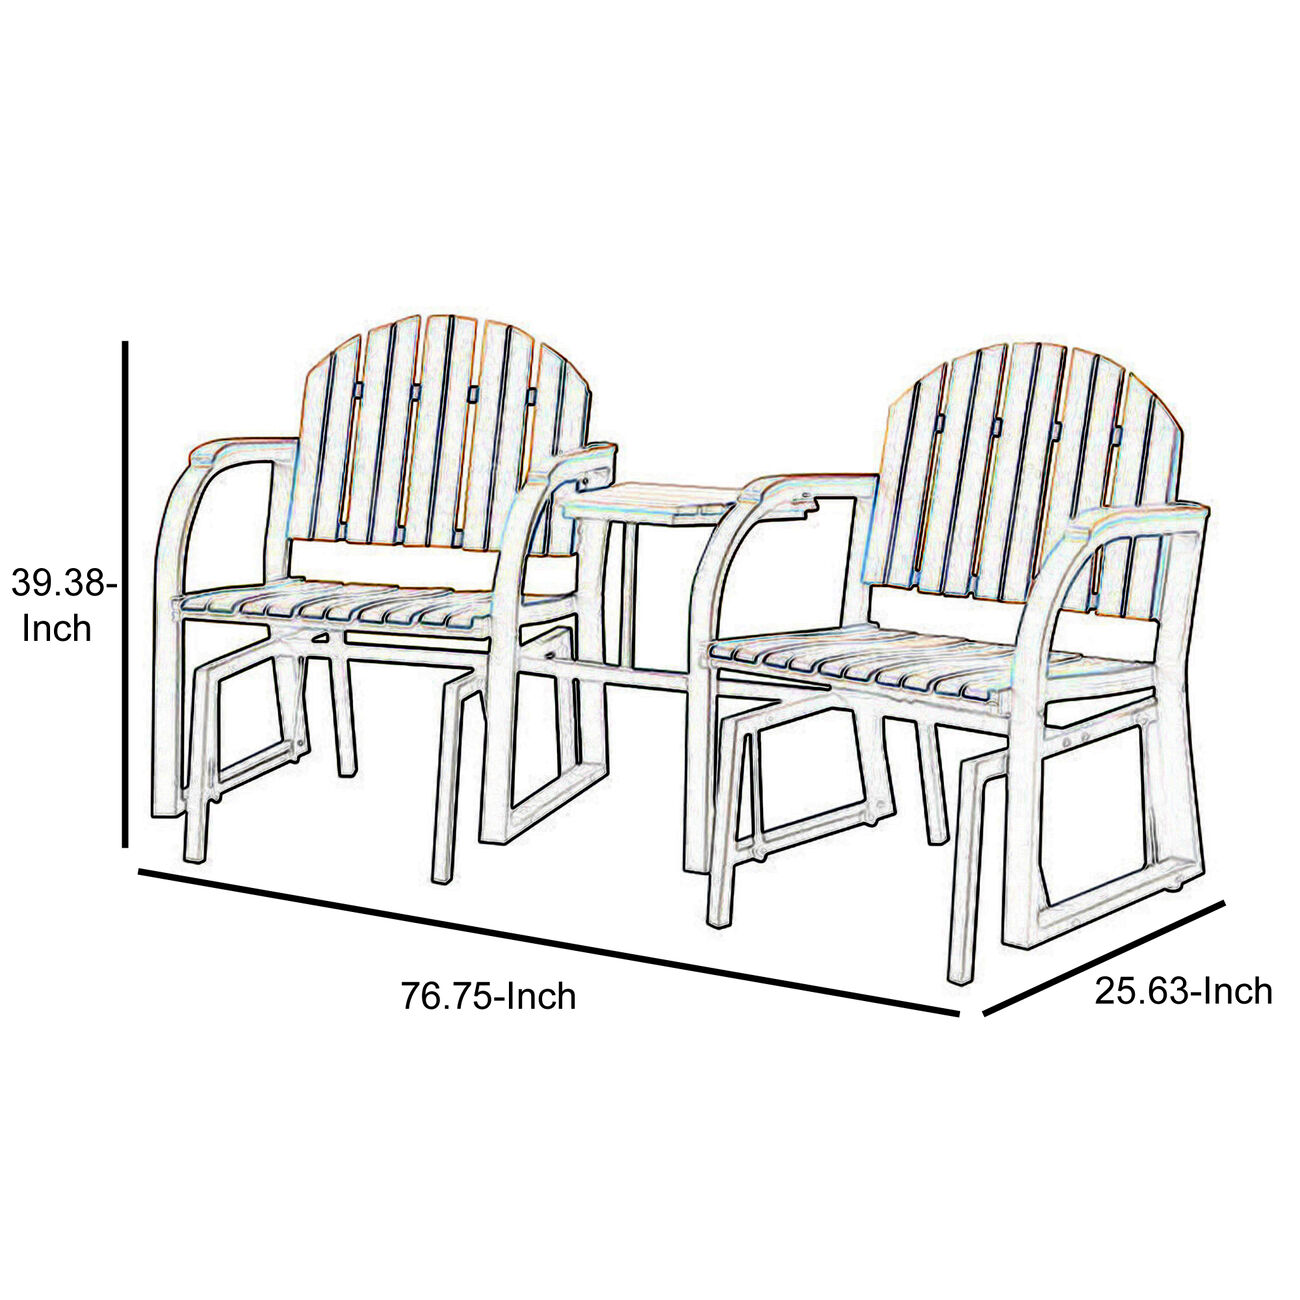 Perse Contemporary Rocking Chair Set, Oak Finish